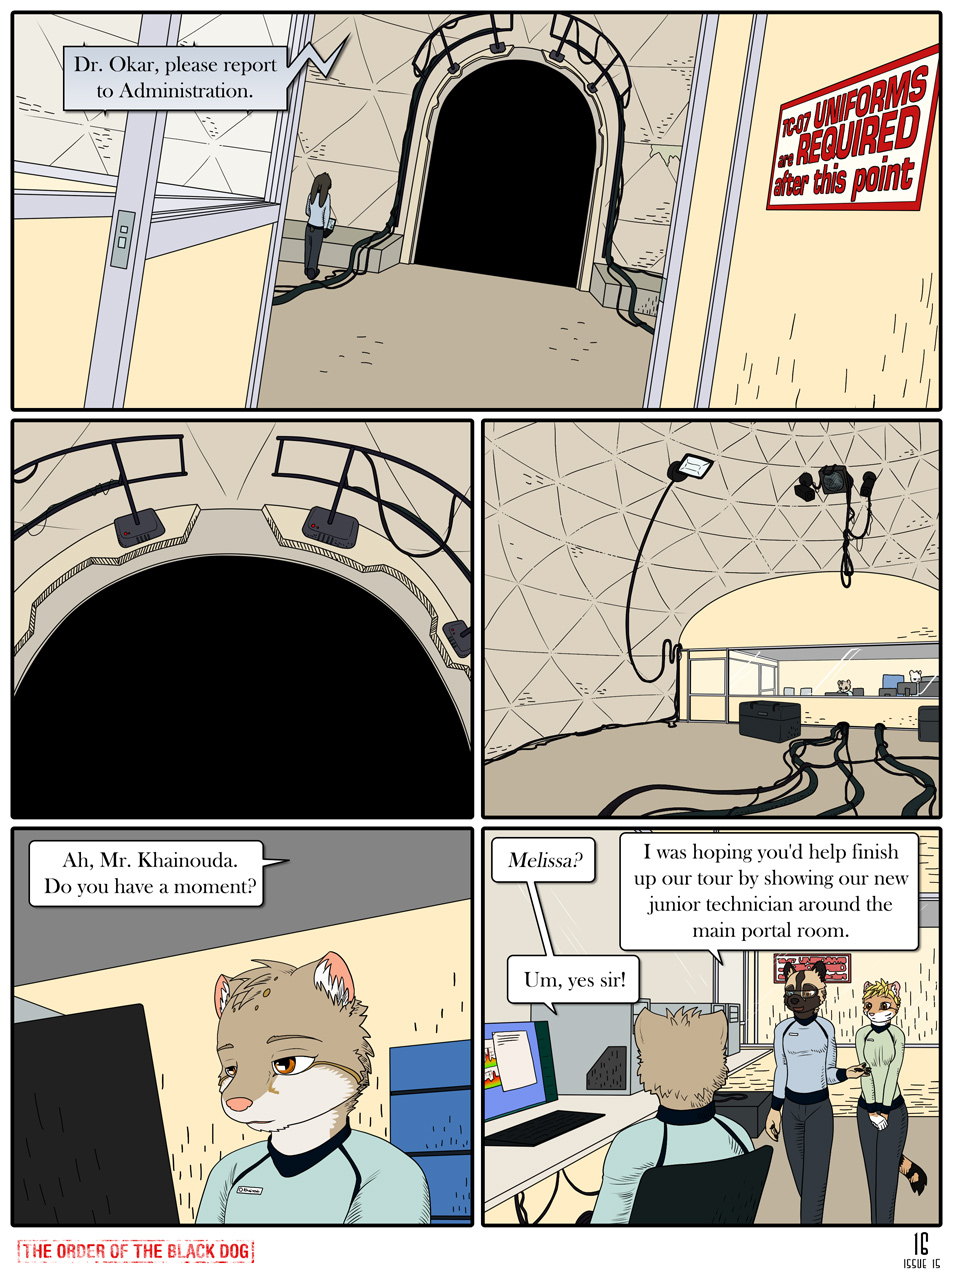 Issue 15, Page 16